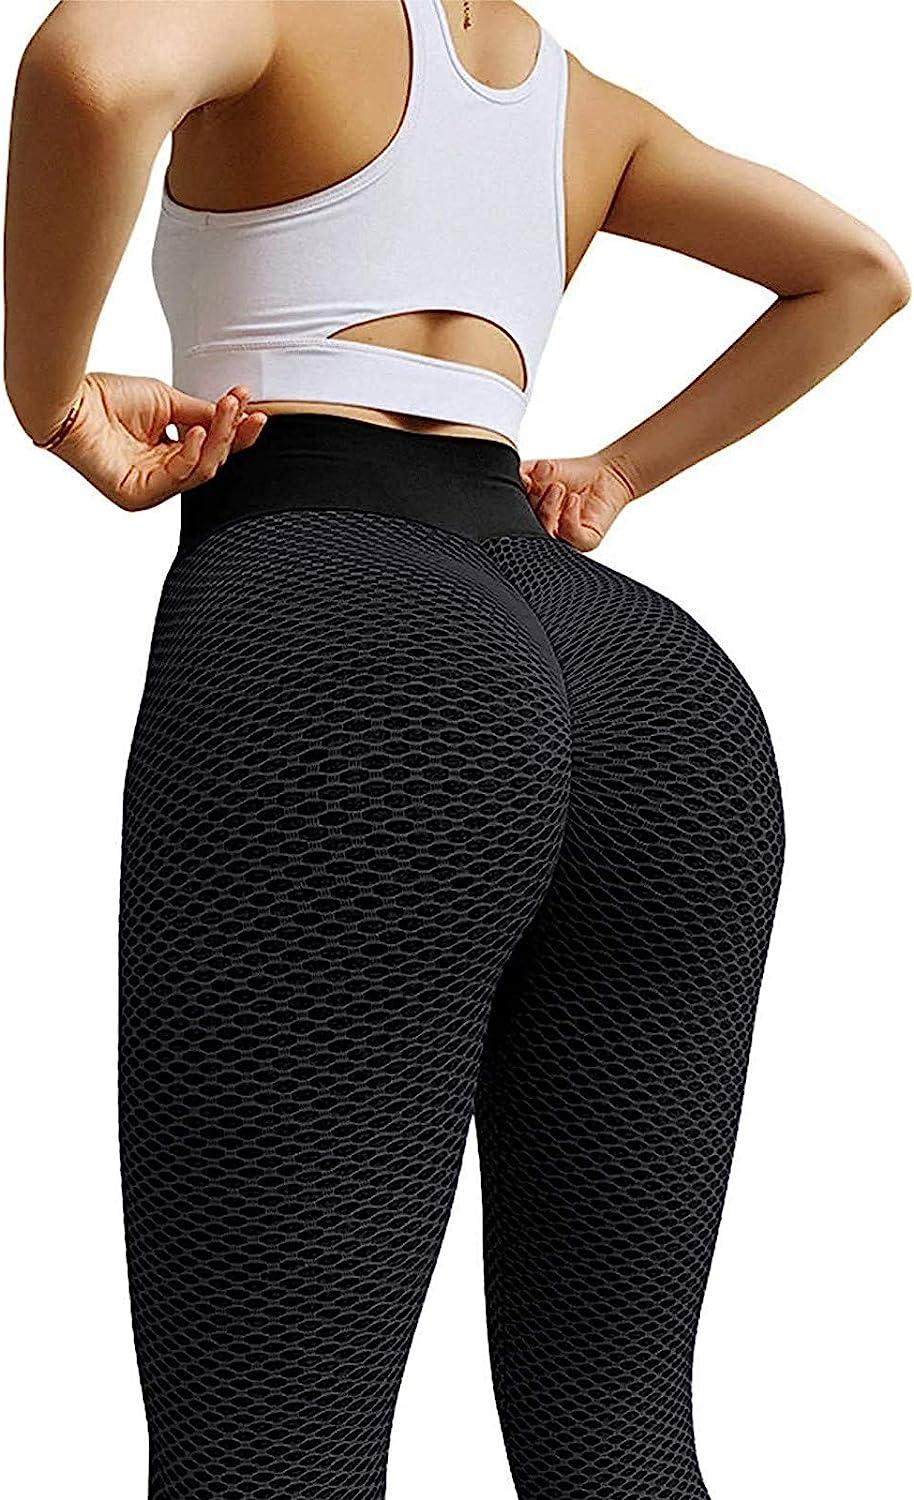 Women's High Waisted Cotton Compression Leggings. - Long, skinny leg design  - Does not ball or pill - Comfortable and easy pull-on style - Solid color  - Very Stretchy - Tummy Control 